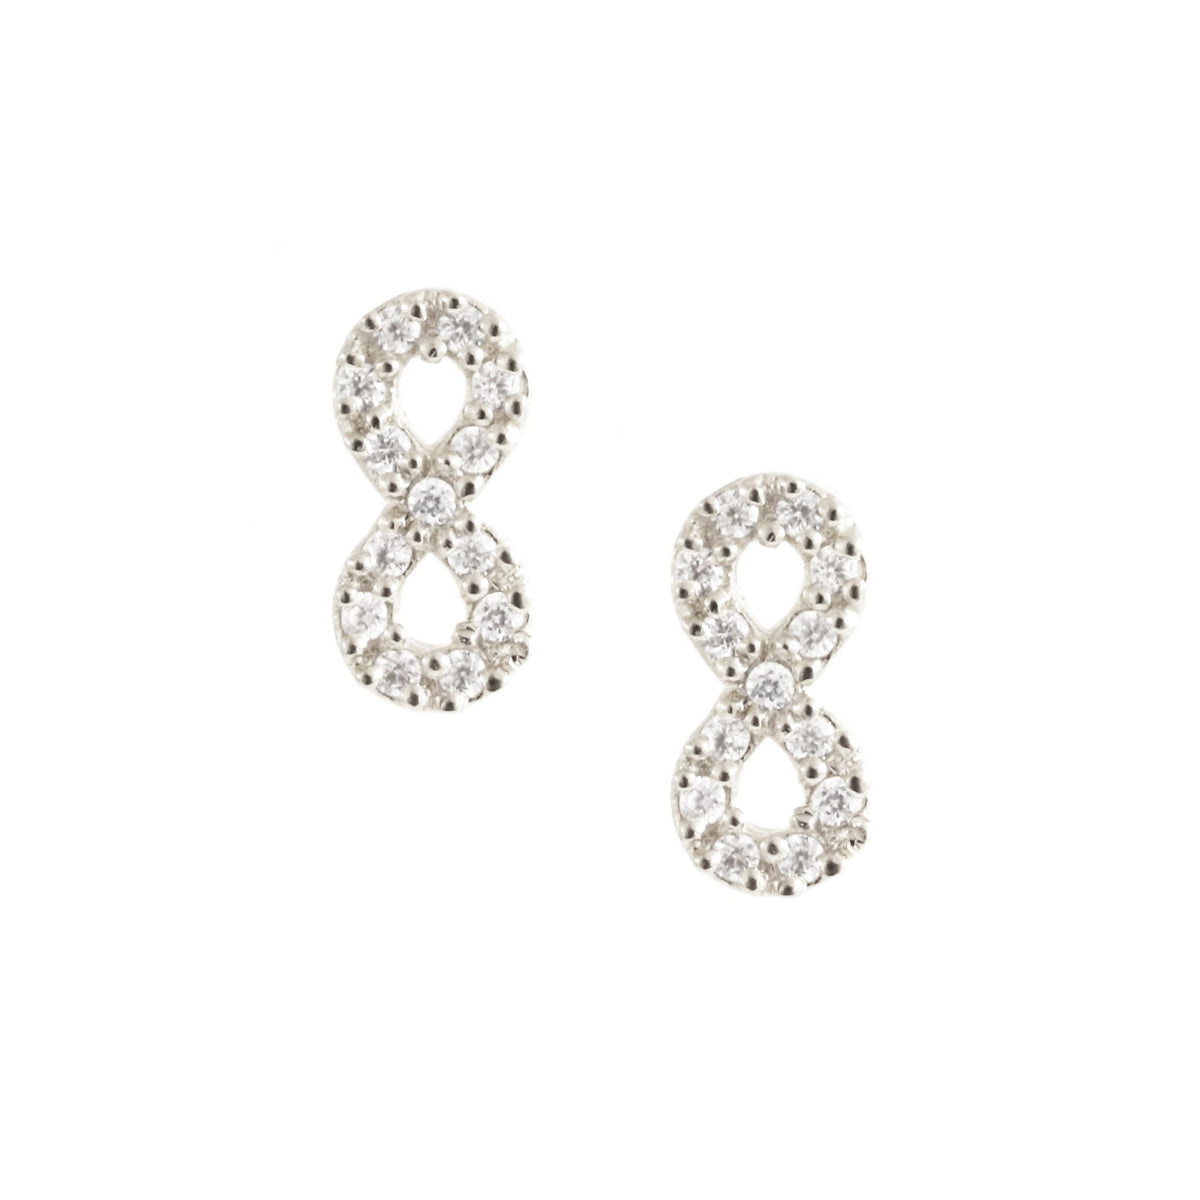 LOVE INFINITY STUDS - CUBIC ZIRCONIA &amp; SILVER - SO PRETTY CARA COTTER